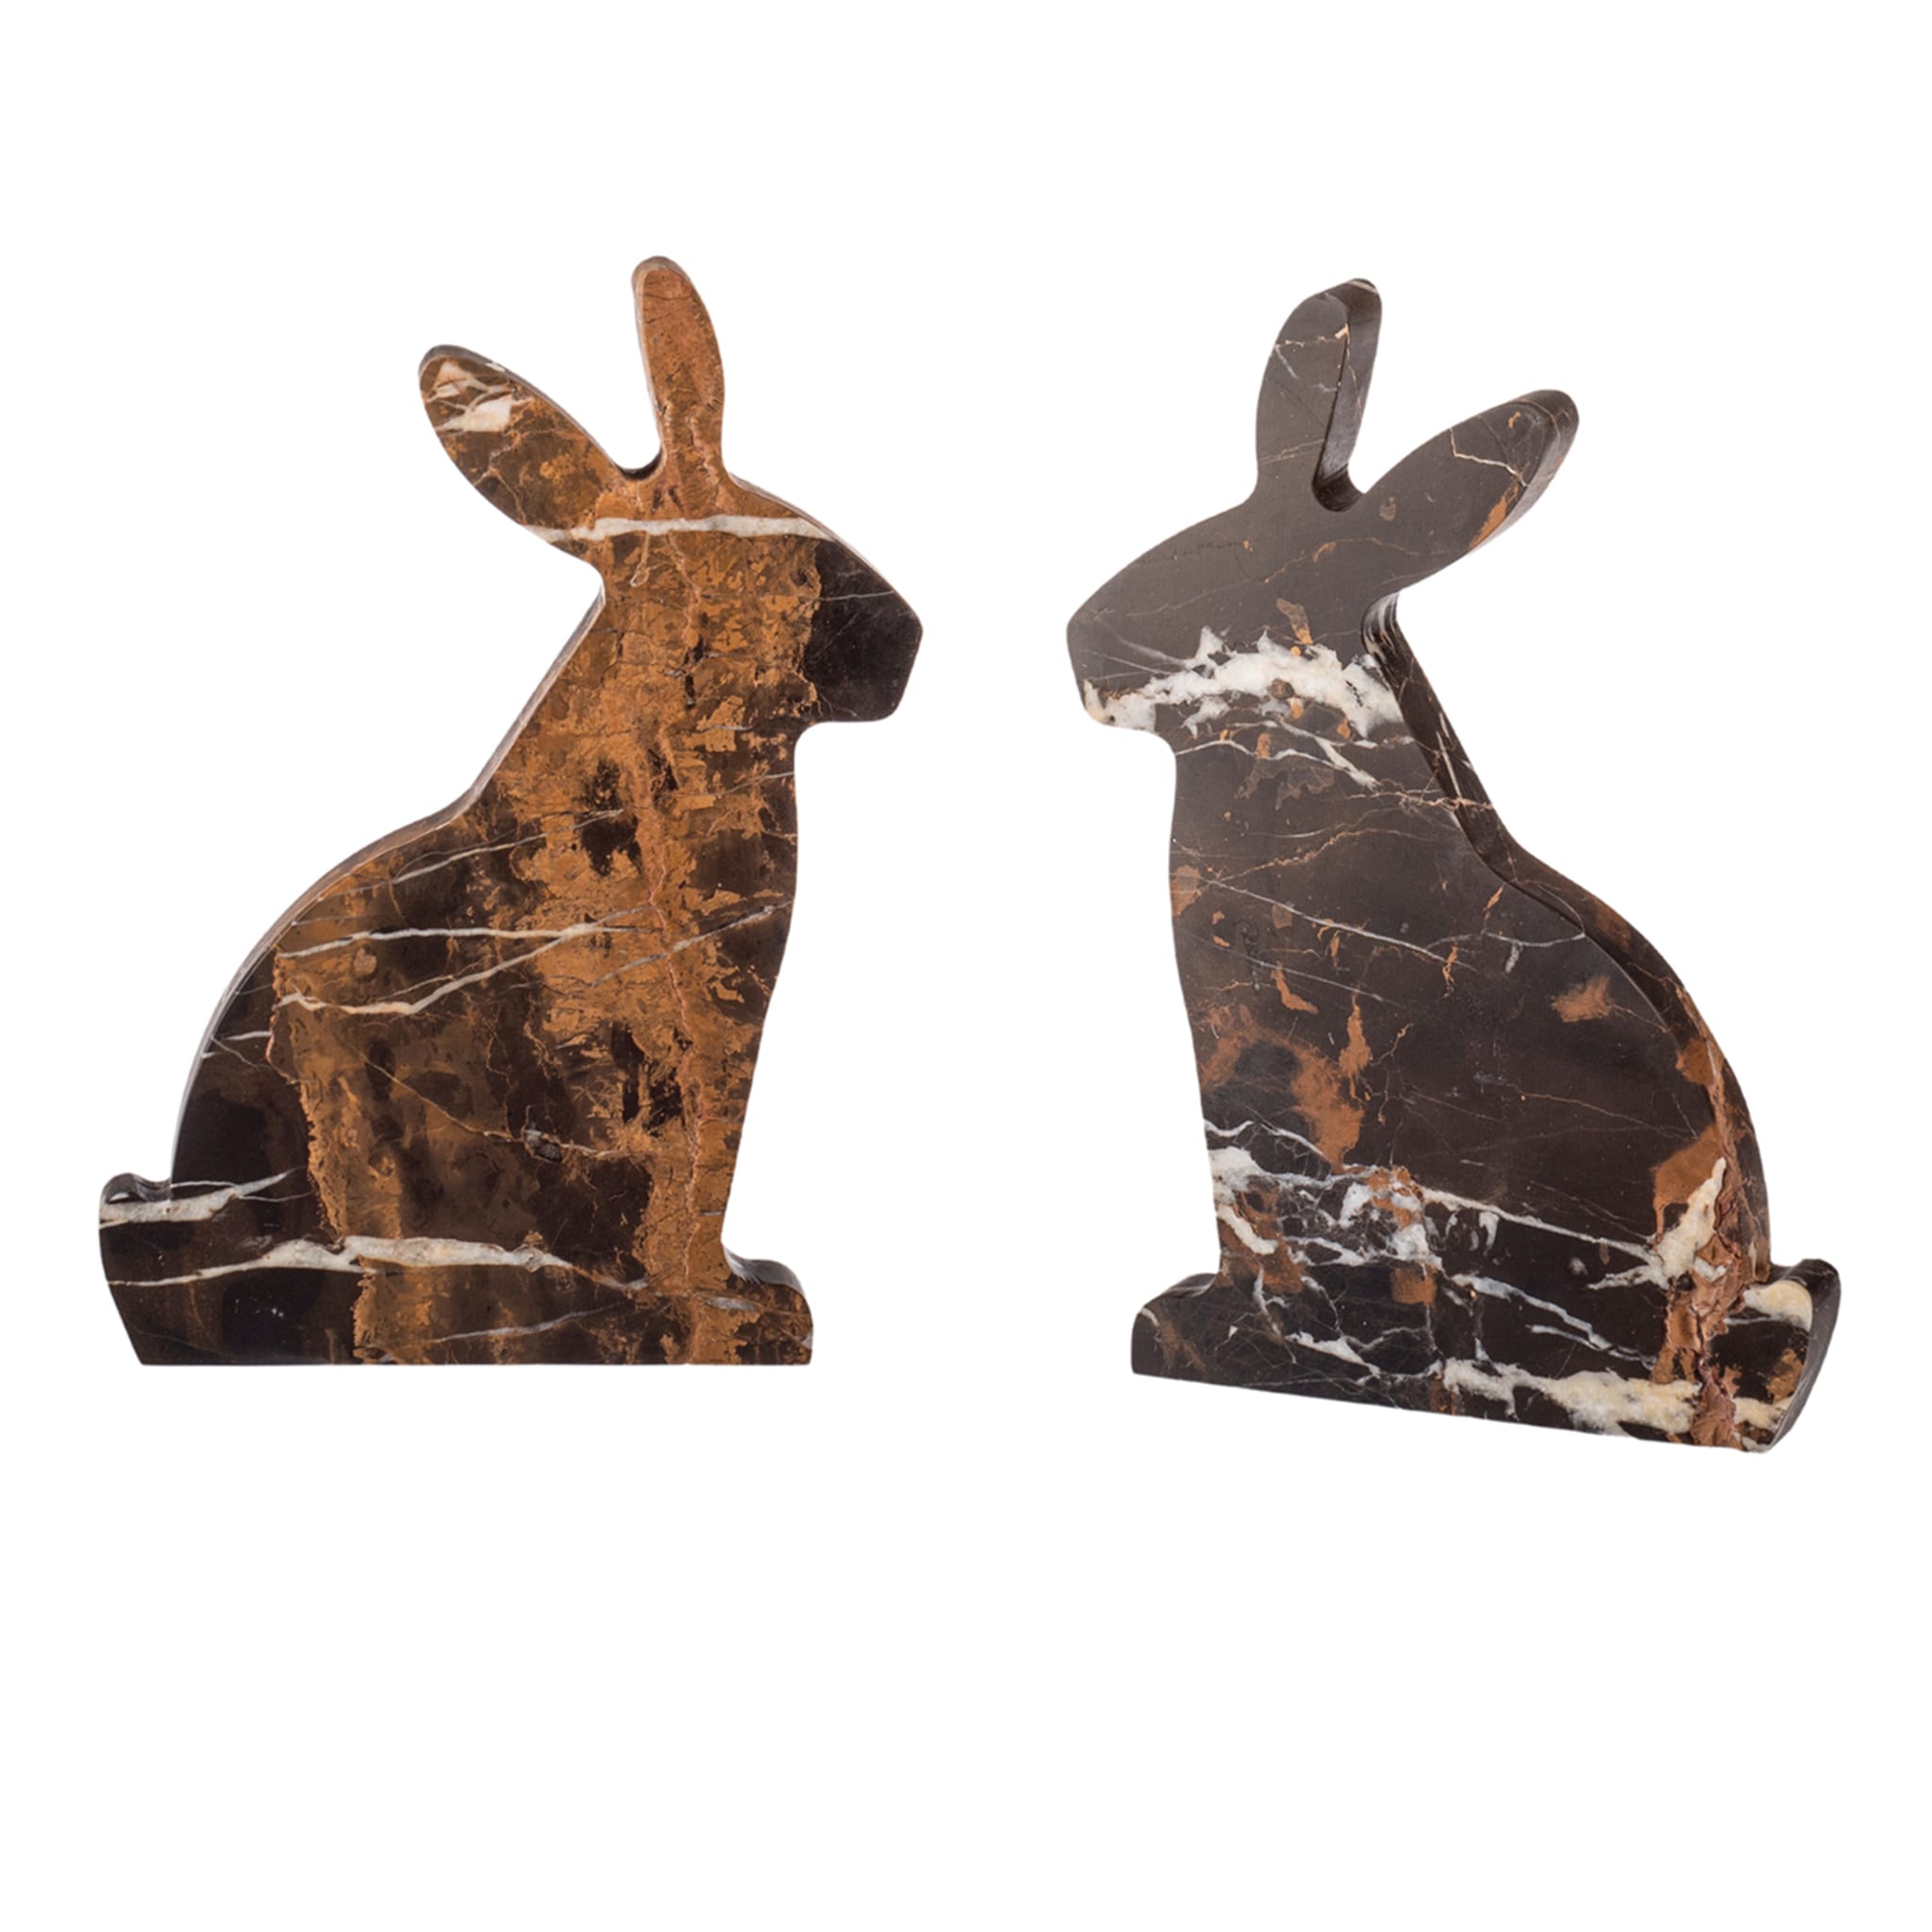 Bunny Set of 2 Black & Gold Bookends by Alessandra Grasso - Alternative view 3